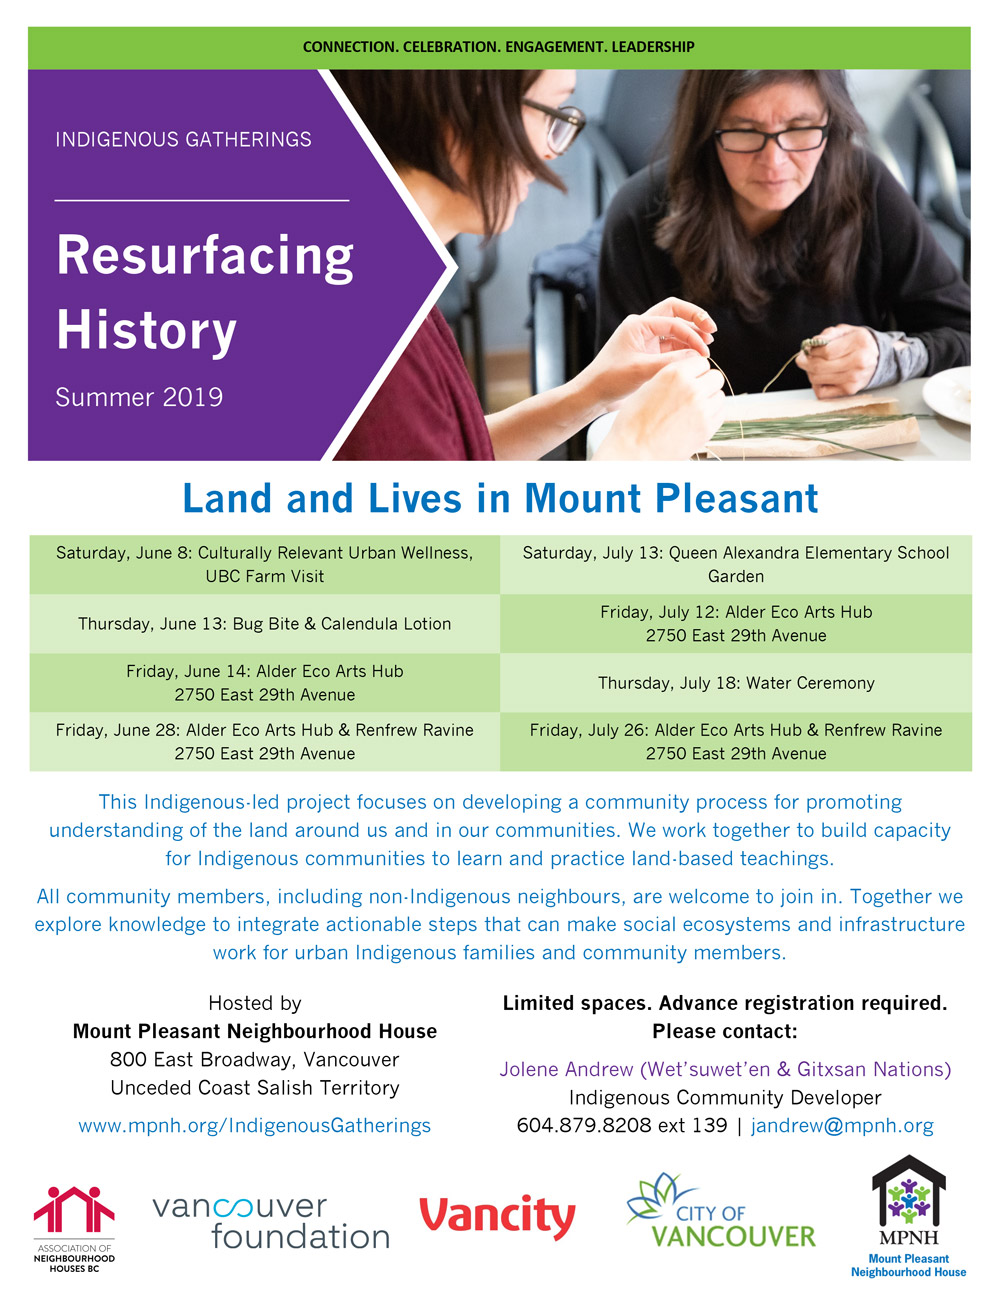 An image of the poster with event details, featuring a photo of two Indigenous people making pine needle baskets.